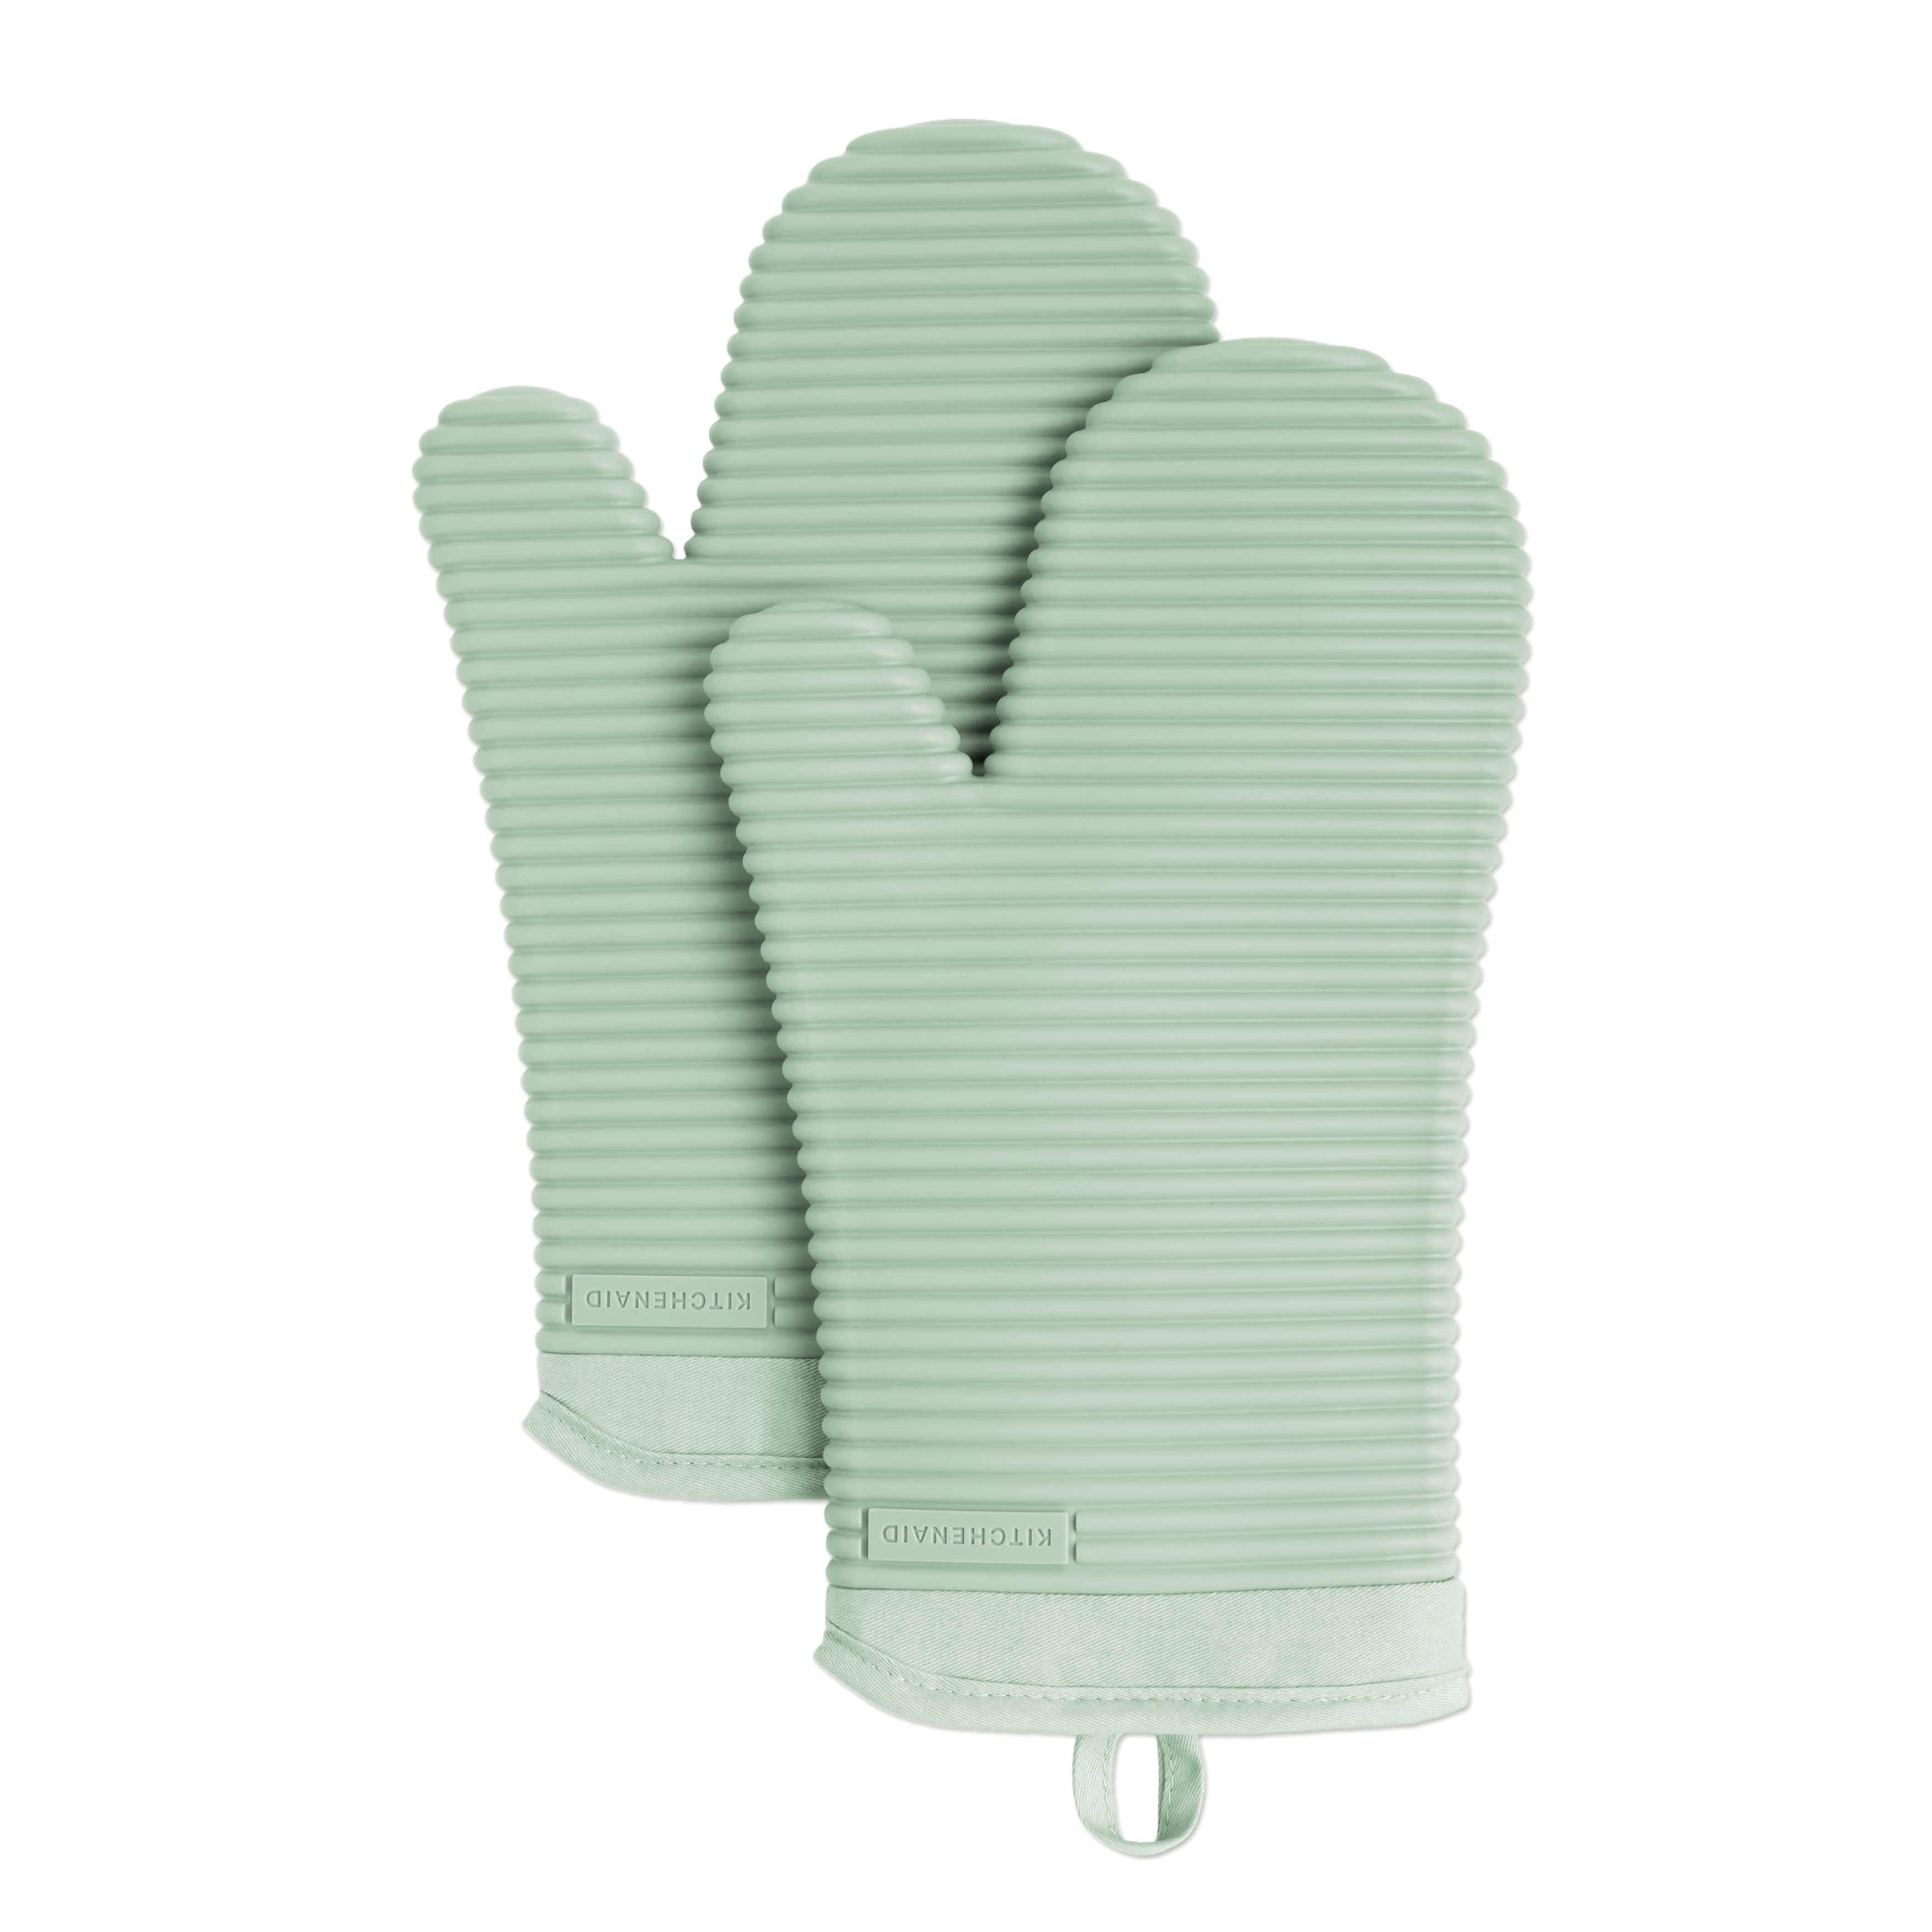 https://ak1.ostkcdn.com/images/products/is/images/direct/531ac33e2cb4b7c9a55289b36a0543ebc0d2d31a/KitchenAid-Ribbed-Soft-Silicone-Oven-Mitt-Set%2C-7.5%22x13%22%2C-2-Pack.jpg